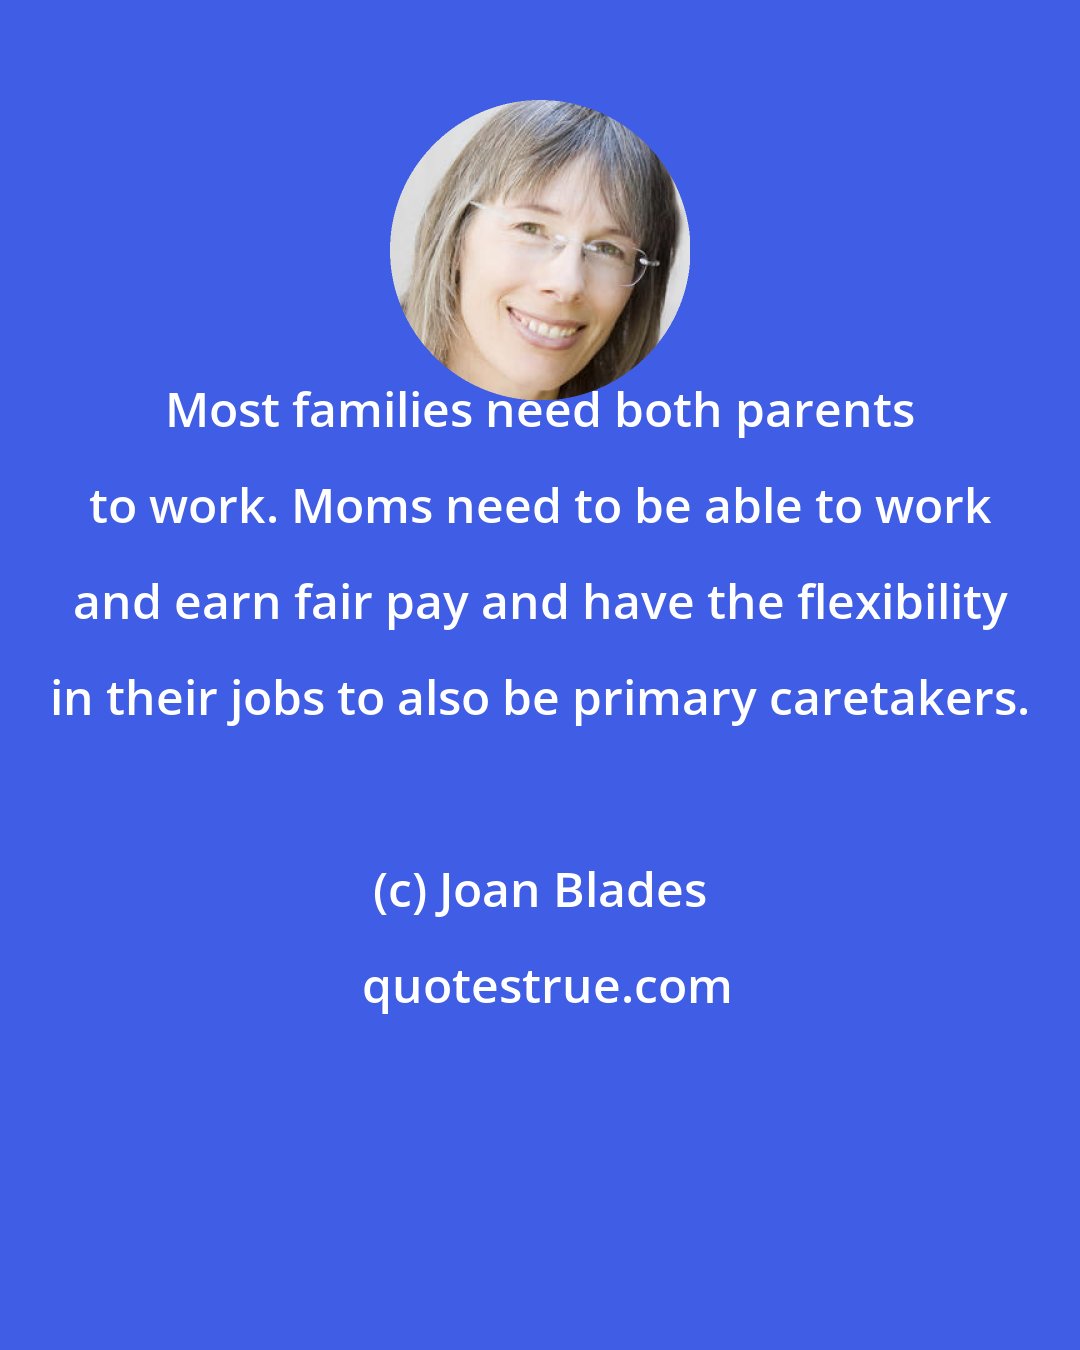 Joan Blades: Most families need both parents to work. Moms need to be able to work and earn fair pay and have the flexibility in their jobs to also be primary caretakers.